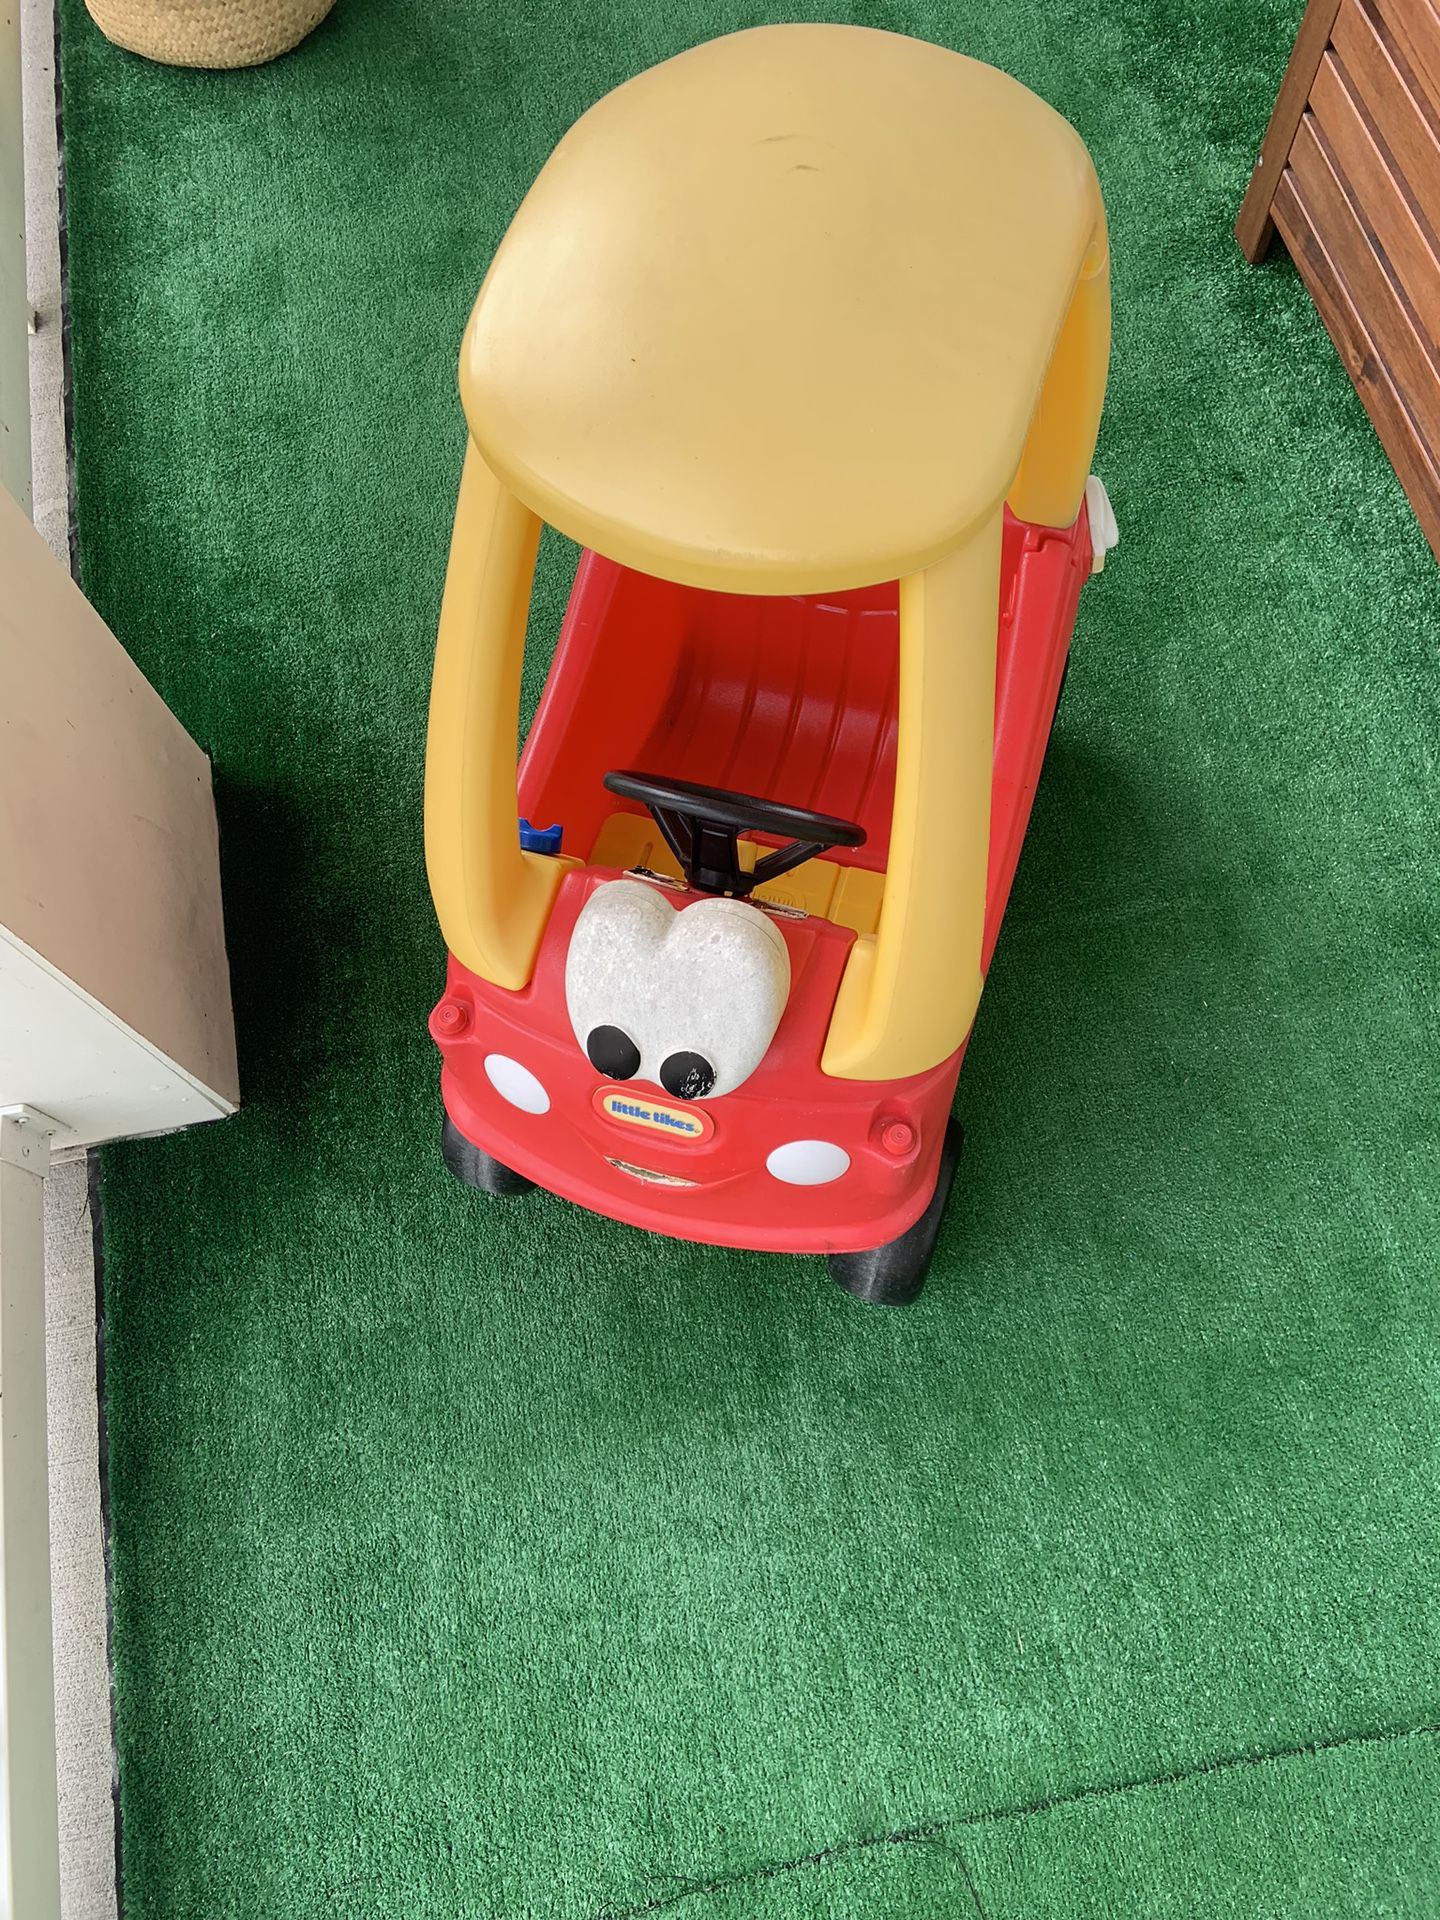 The Little Tikes Cozy Coupe ride on toy